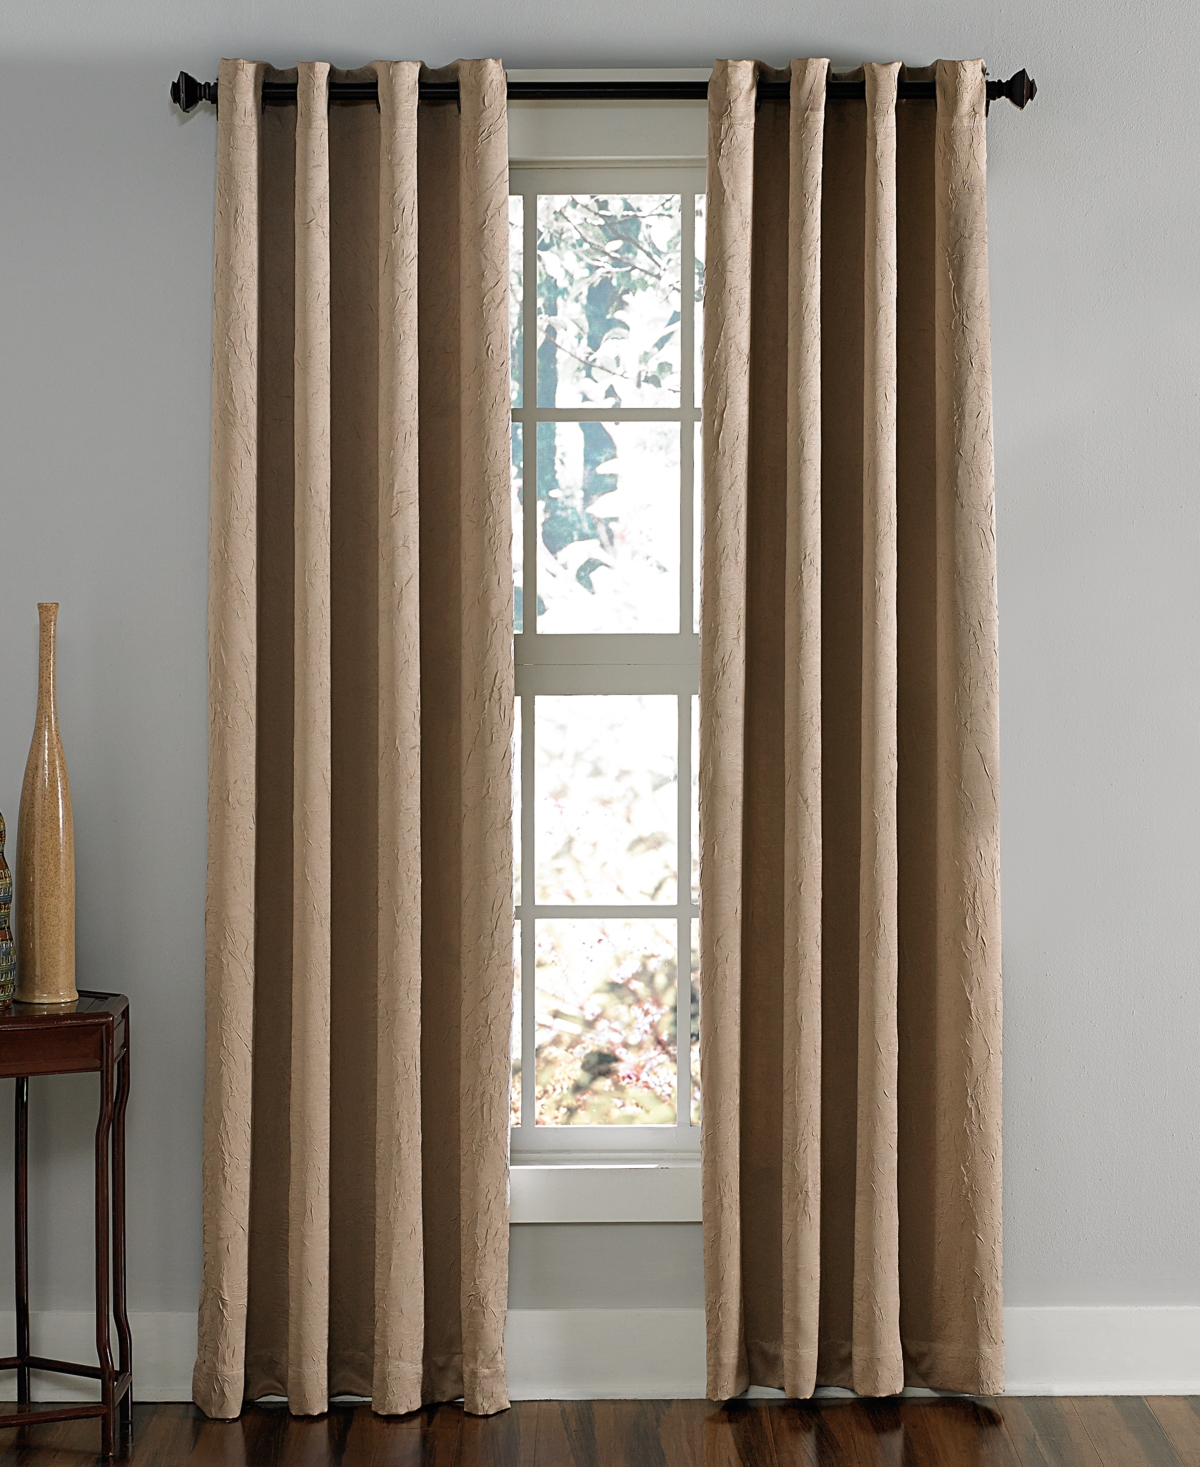 Chf Lenox 50" X 132" Crushed Texture Curtain Panel In Taupe